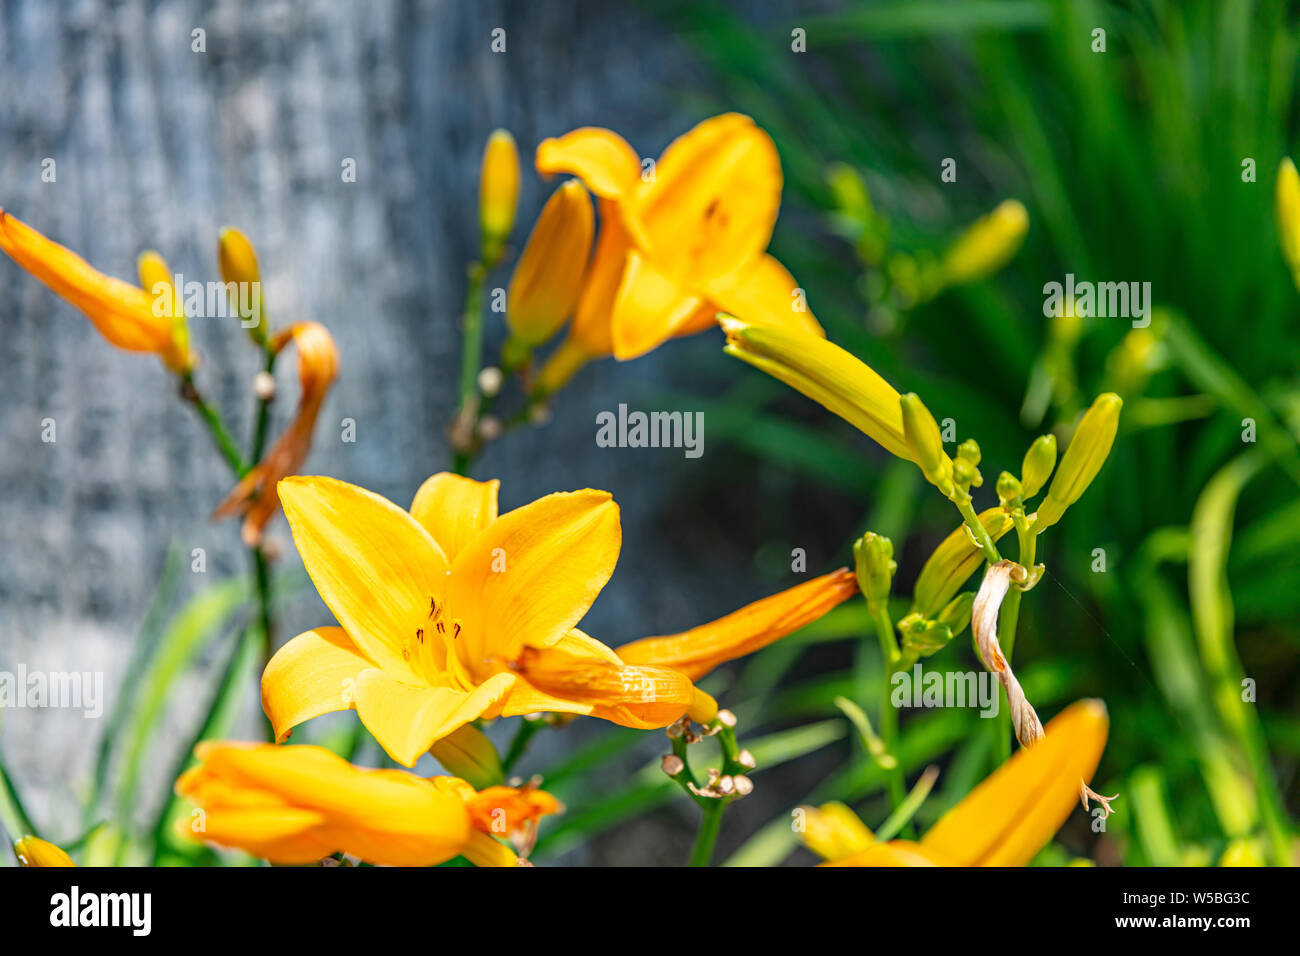 Bright yellow color freesia blossoms closeup view, sunny spring day, California US of America Stock Photo